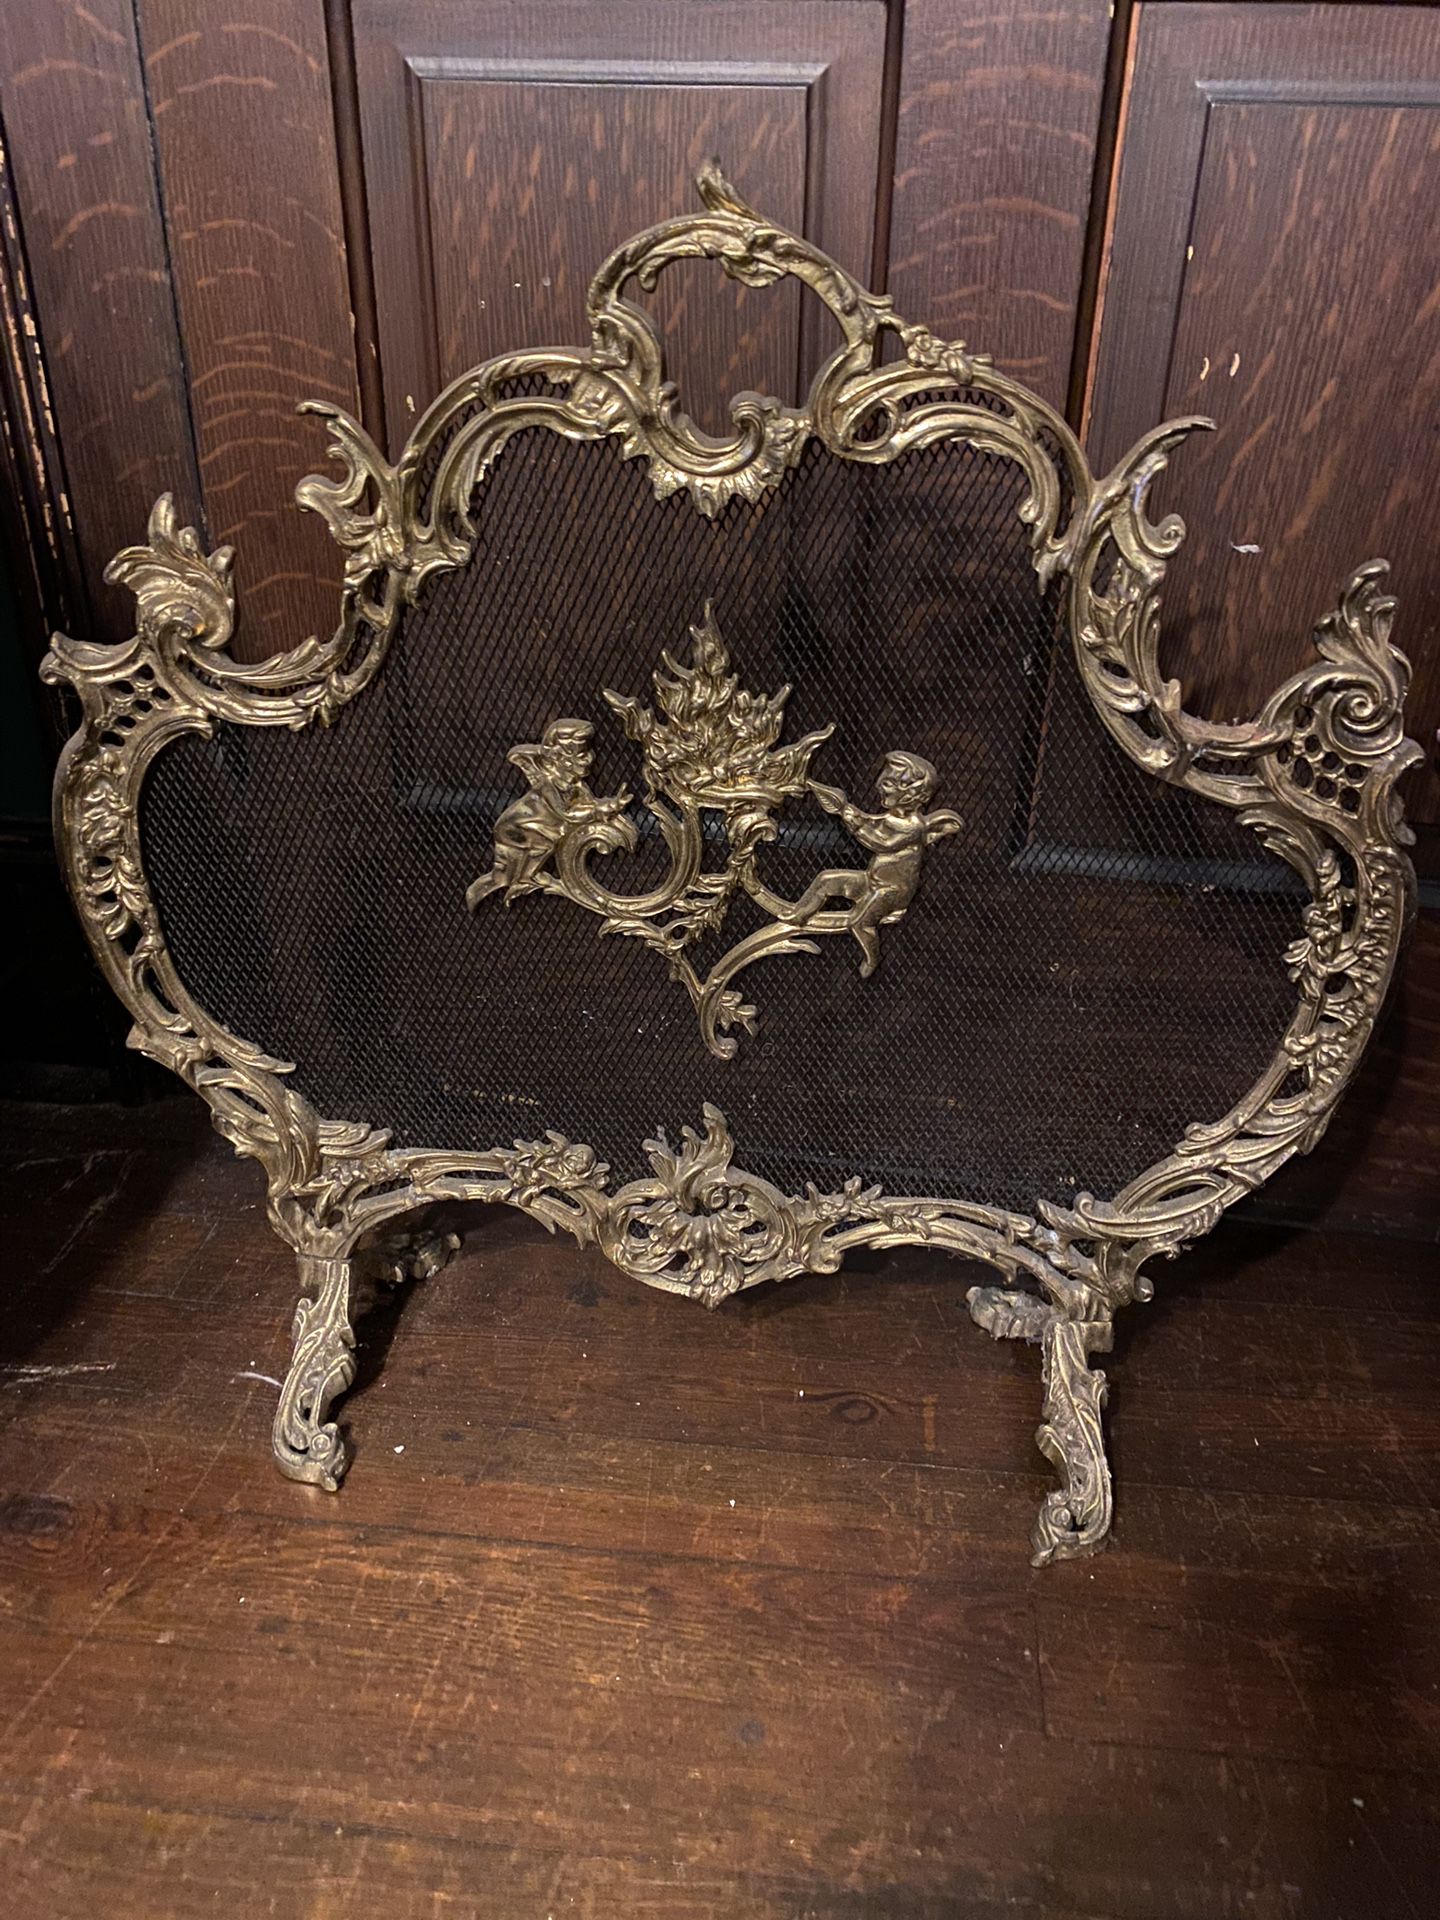 Solid Brass French Rococo Style Cherubs Fireplace Screen BONUS!Comes wBRASS fireplace tools in-pic!